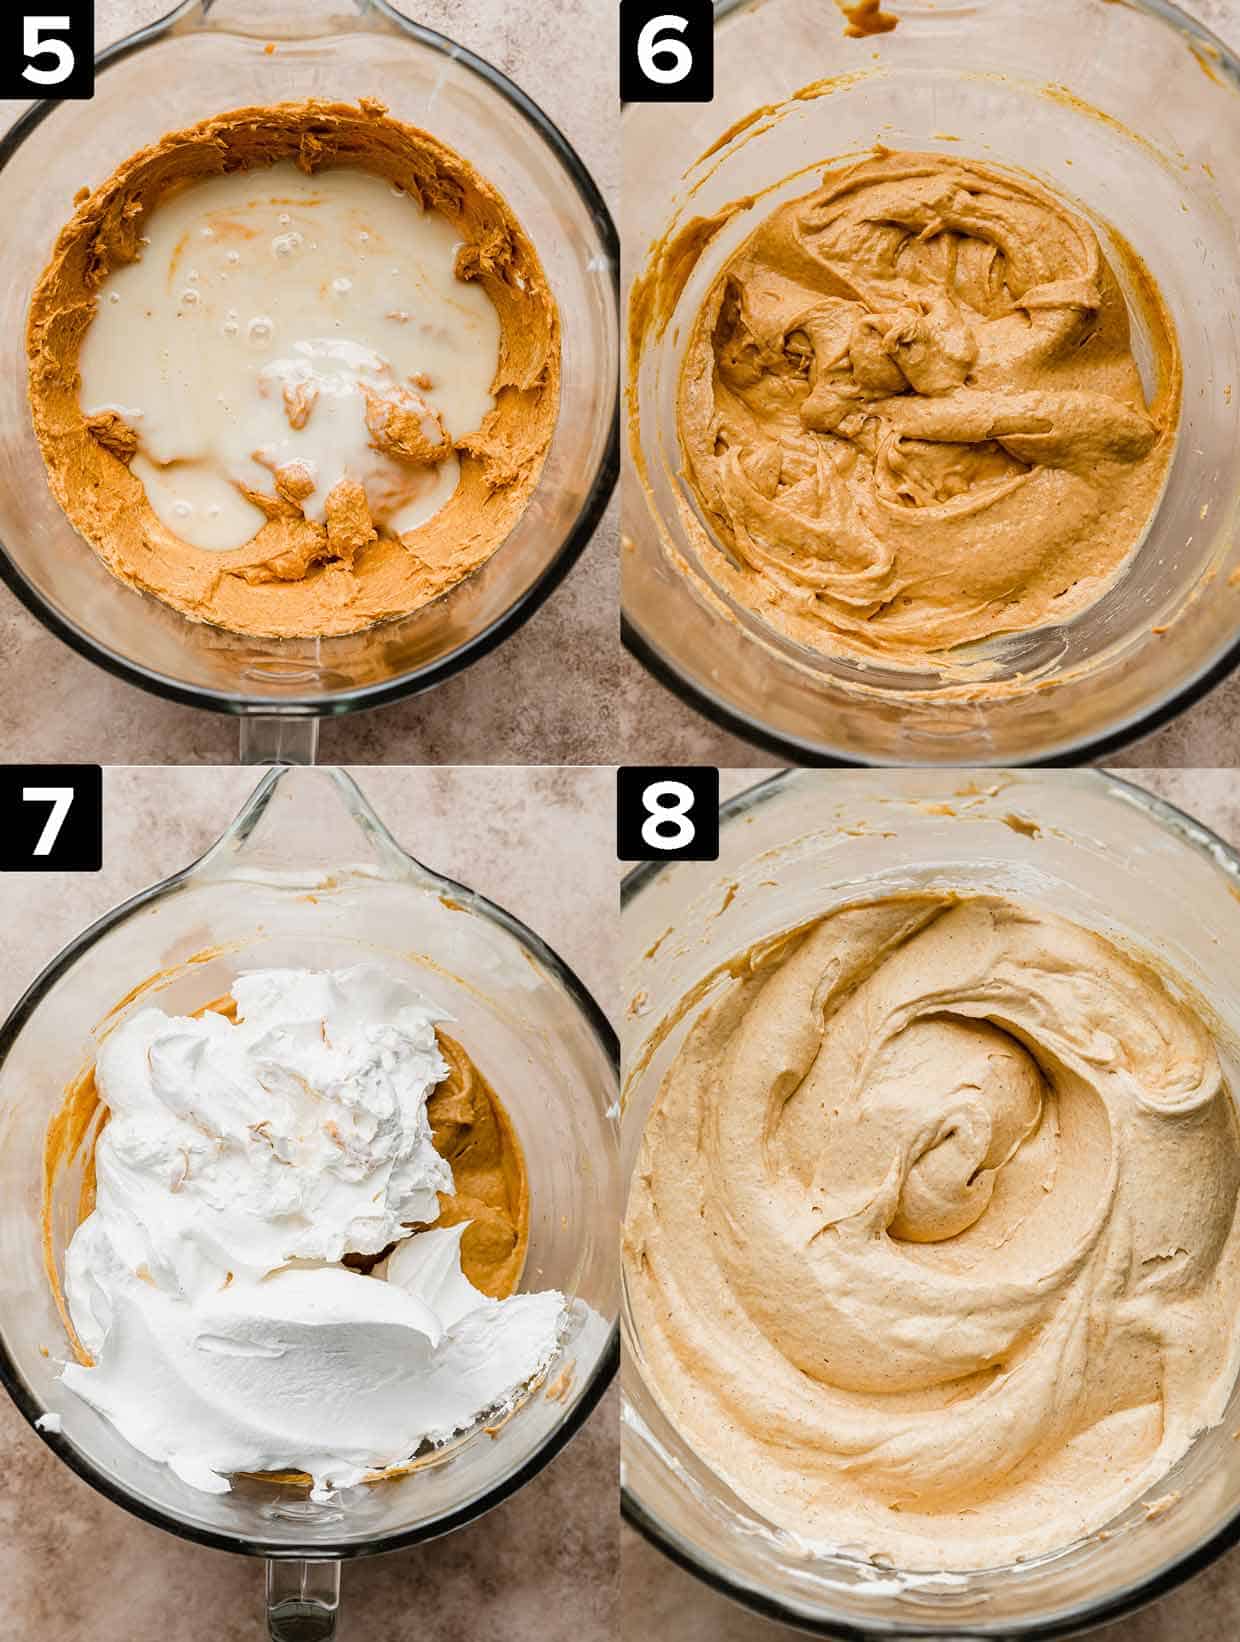 Four images showing the making of no-bake pumpkin cheesecake filling in a glass mixing bowl.